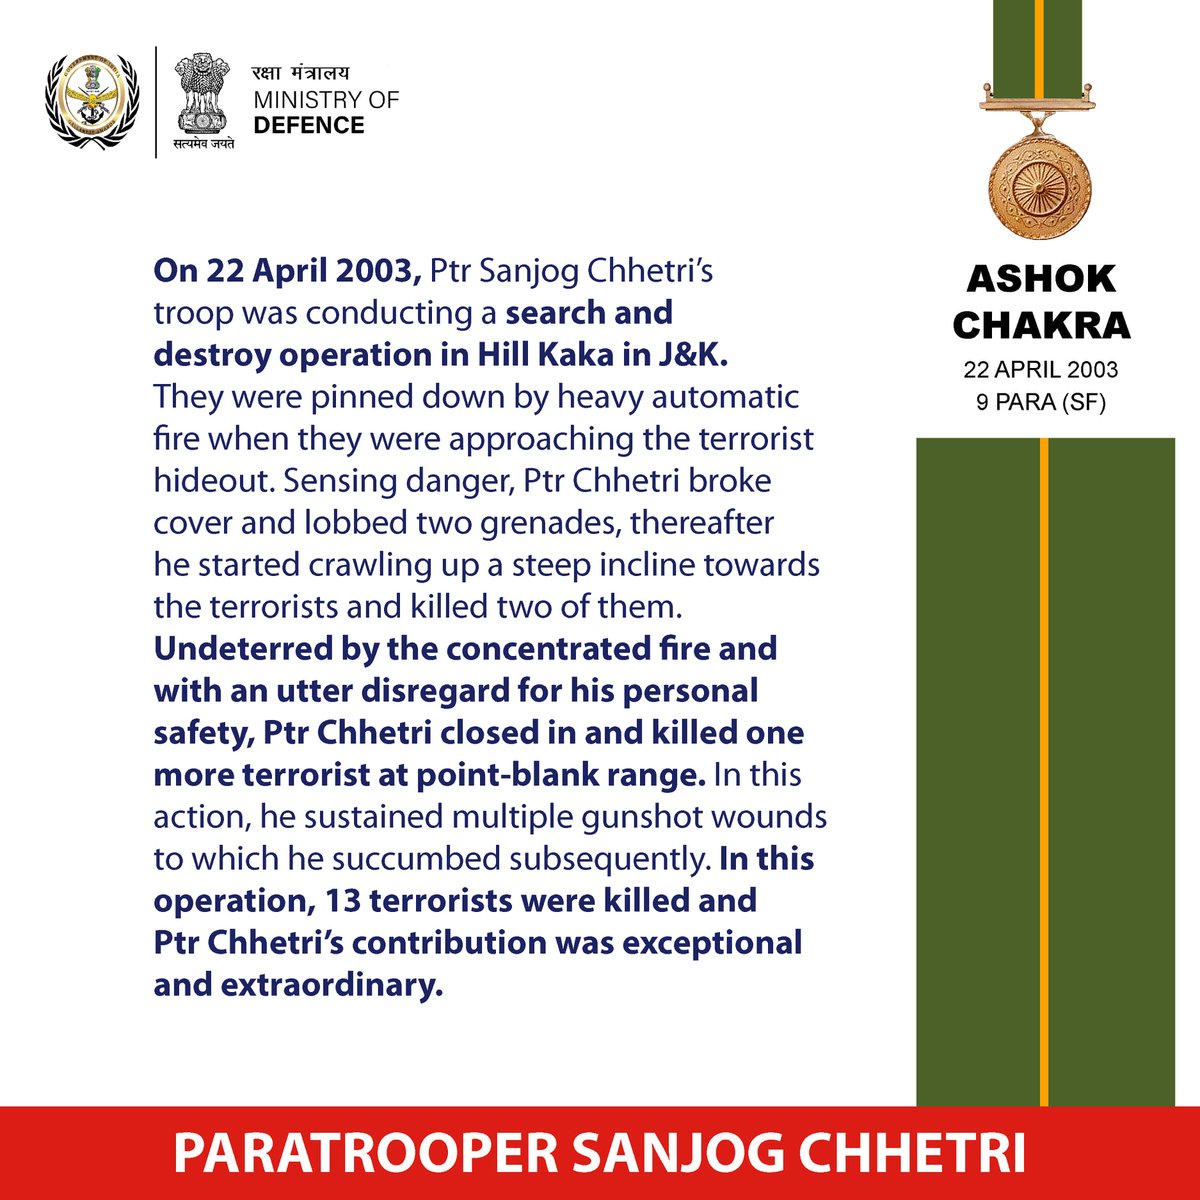 Paratrooper Sanjog Chhetri of 9 Para (SF) was part of ‘Operation Sarp Vinash’ to flush out terrorists in J&K. He made the supreme sacrifice in the highest traditions of the Indian Army and was awarded #AshokChakra for displaying conspicuous gallantry of an exceptional order.